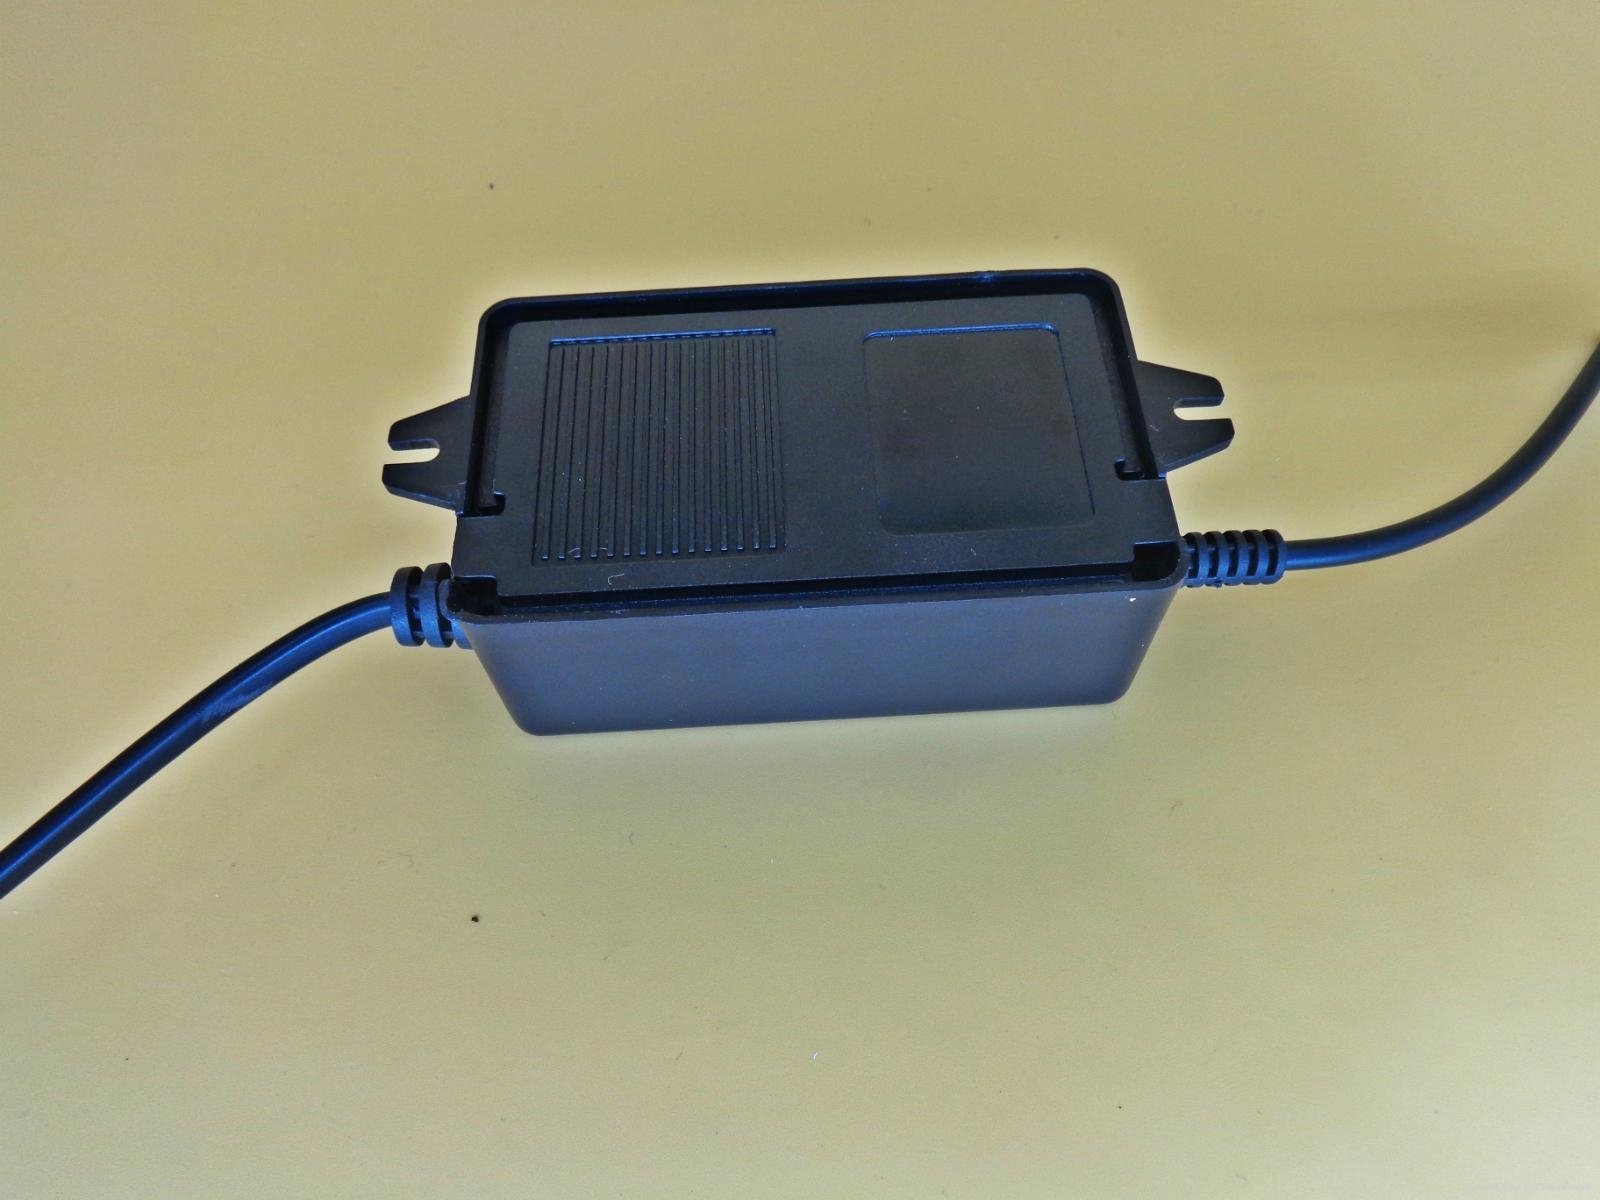 24v 1.5a ac/dc power adapter&adaptor for water purifier 4